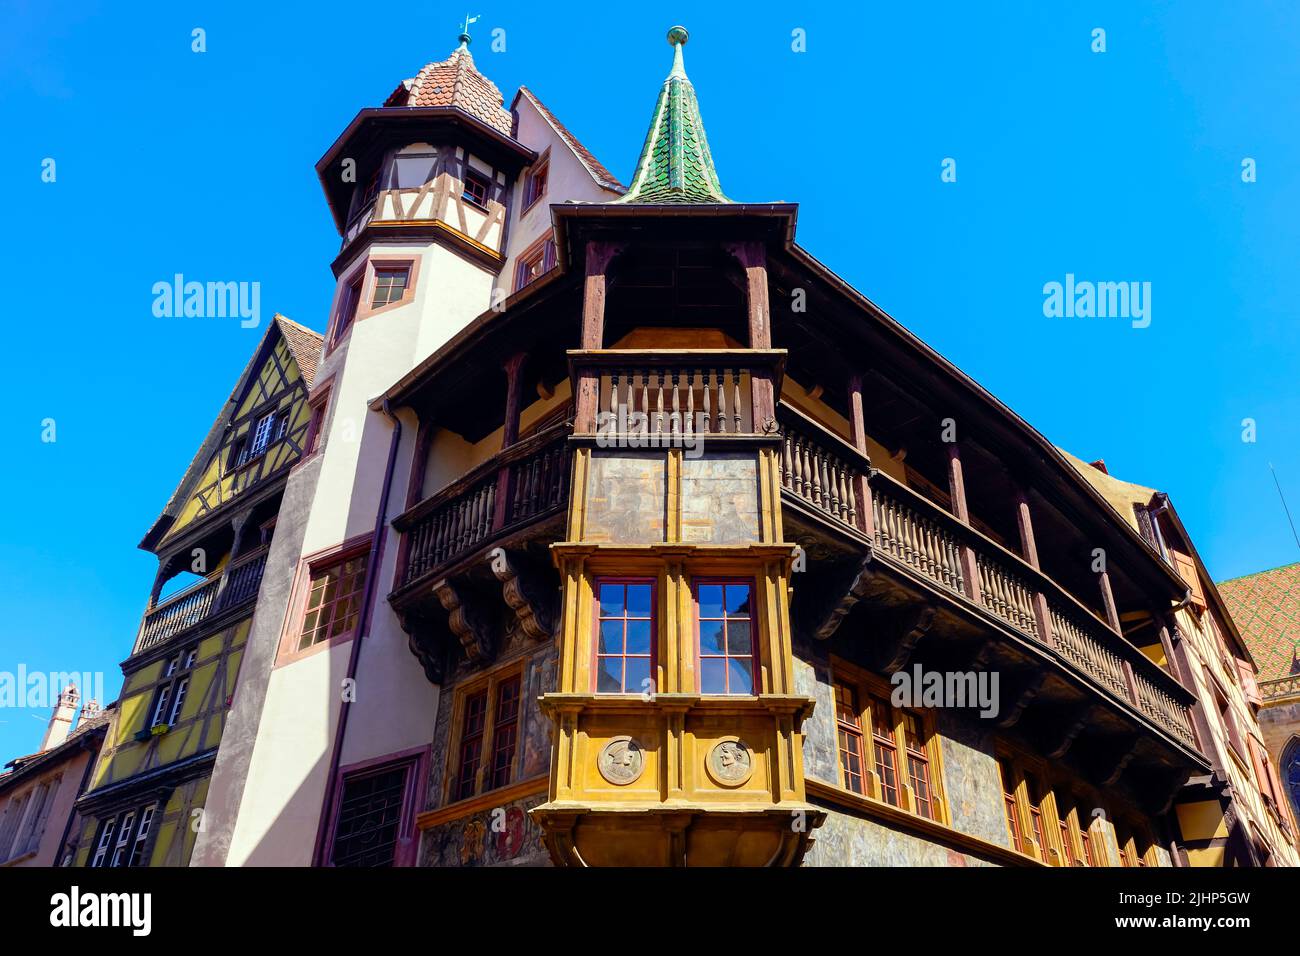 Maison Pfister is corner house divided from the 15th century, located at 11, rue des Marchands. Colmar, Alsace, France. Stock Photo